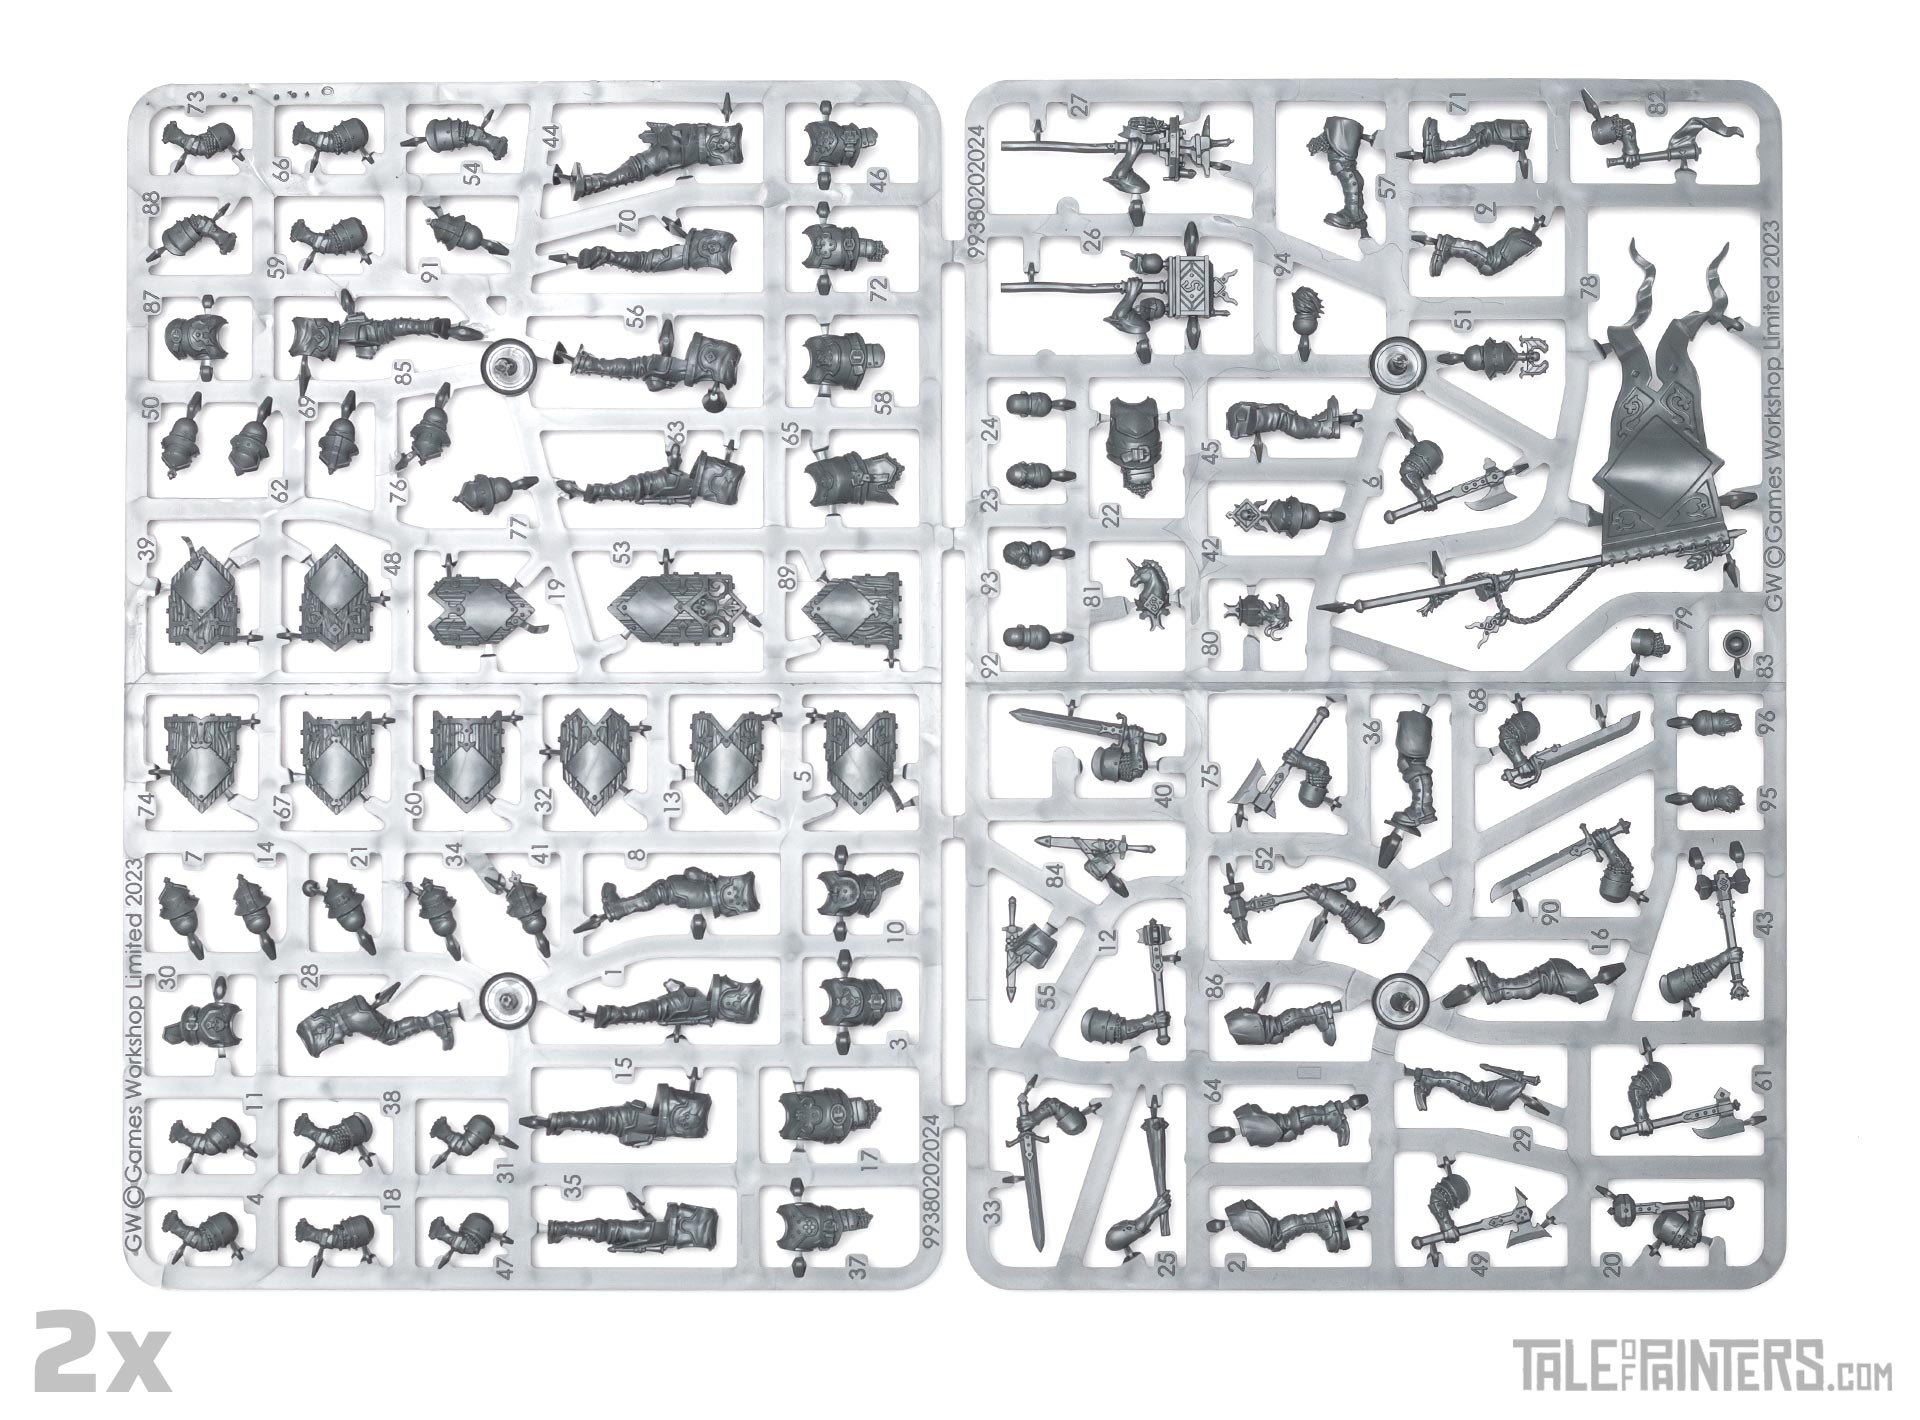 Freeguild Steelhelms sprues from Stahly's Cities of Sigmar army set review